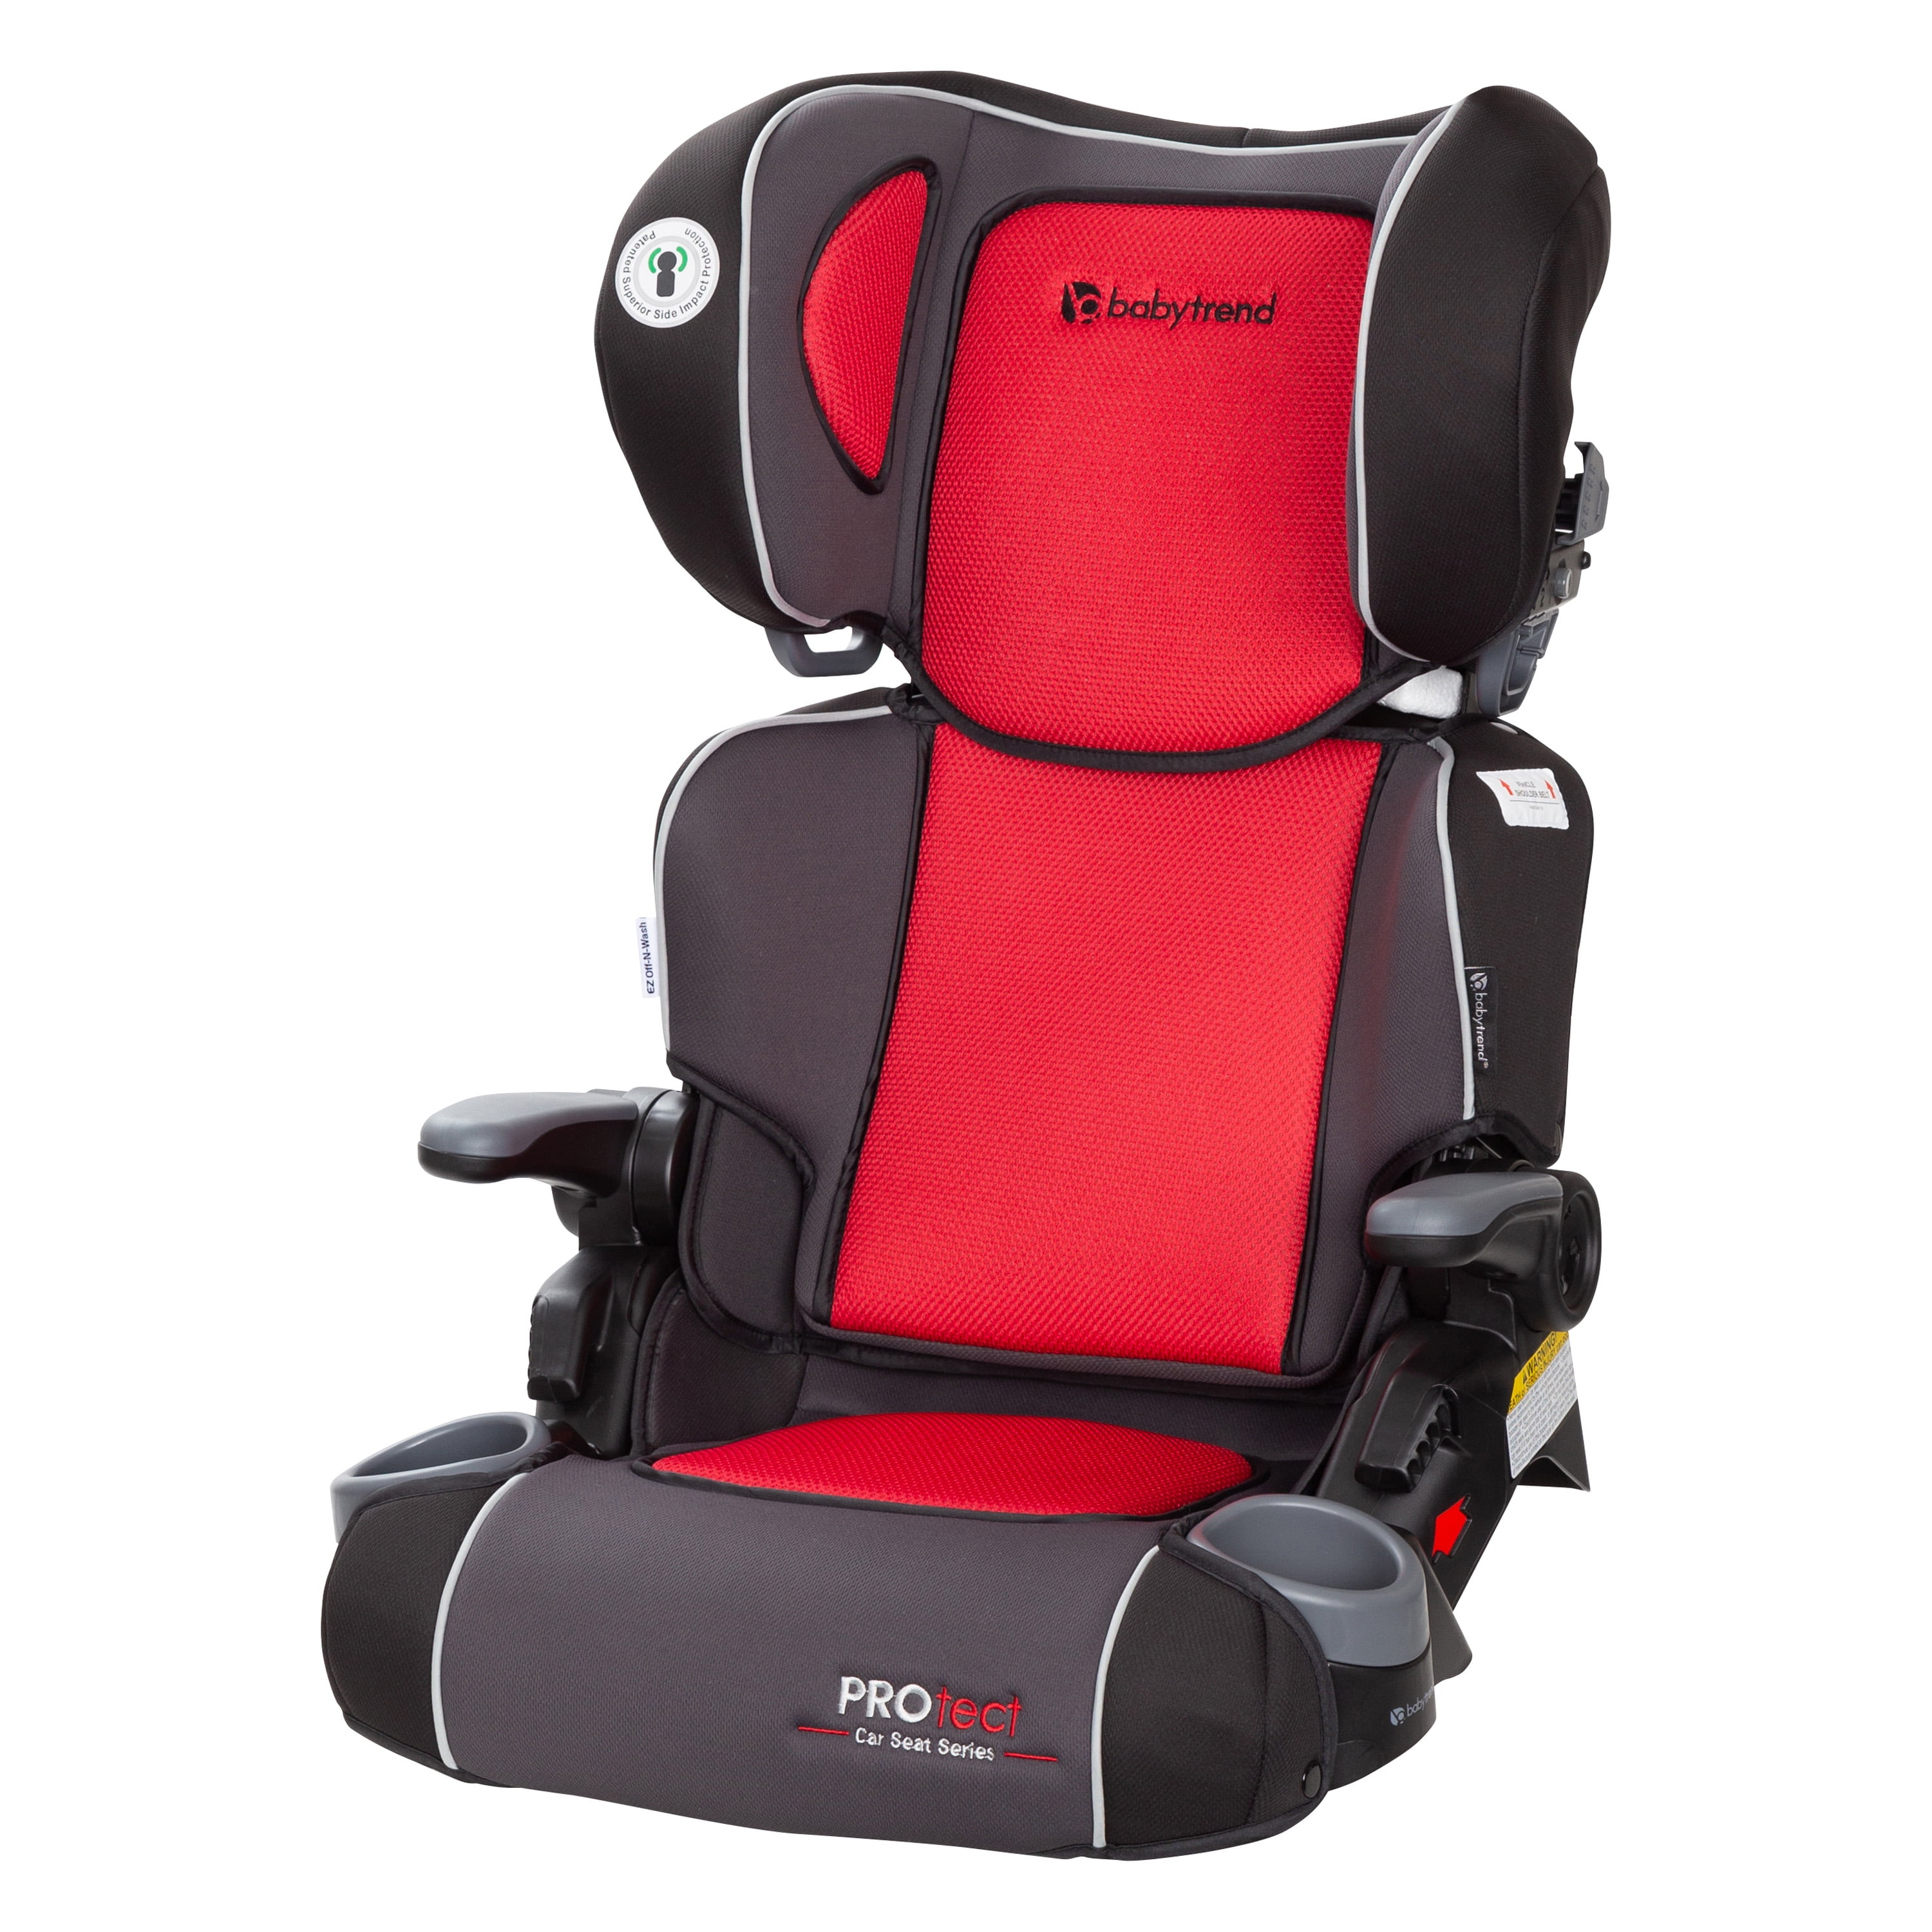 Booster Seat For A 6 Year Old Cheapest Offers, Save 53% | jlcatj.gob.mx